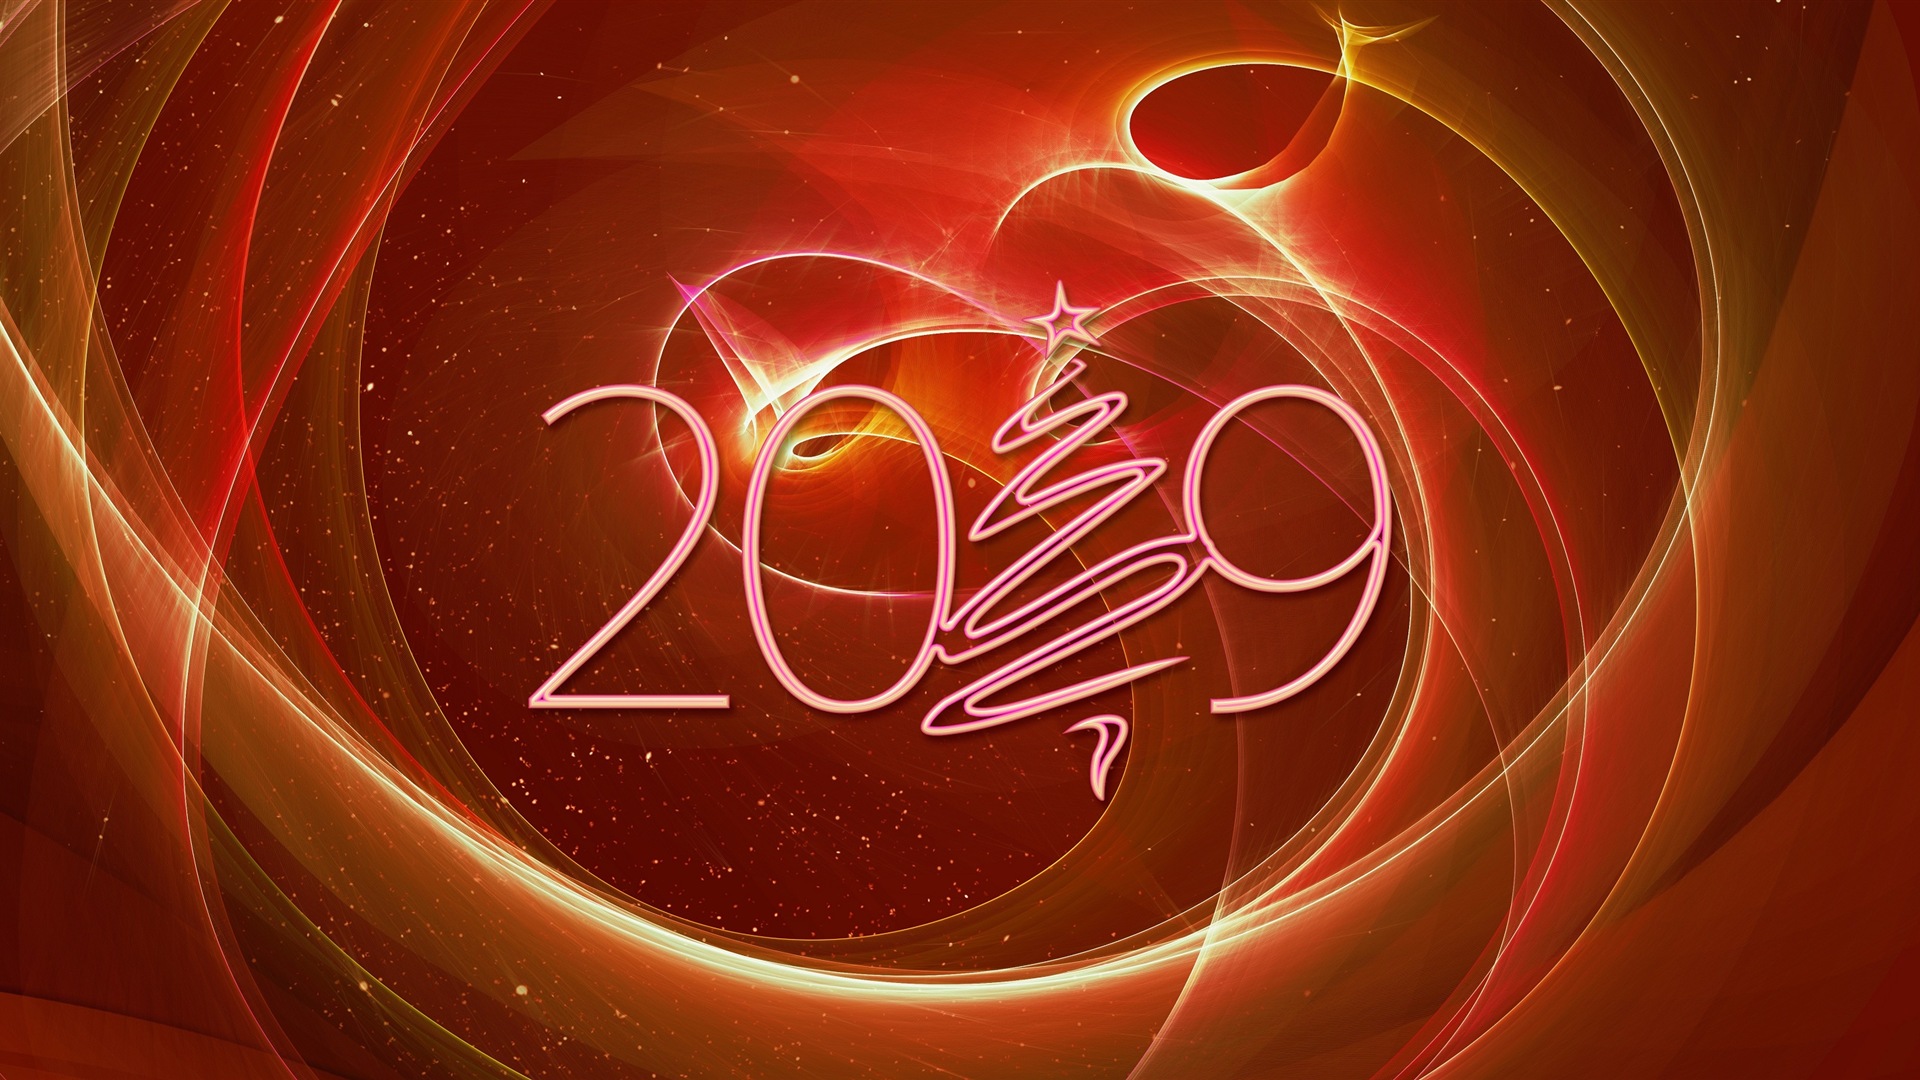 Happy New Year 2019 HD wallpapers #4 - 1920x1080